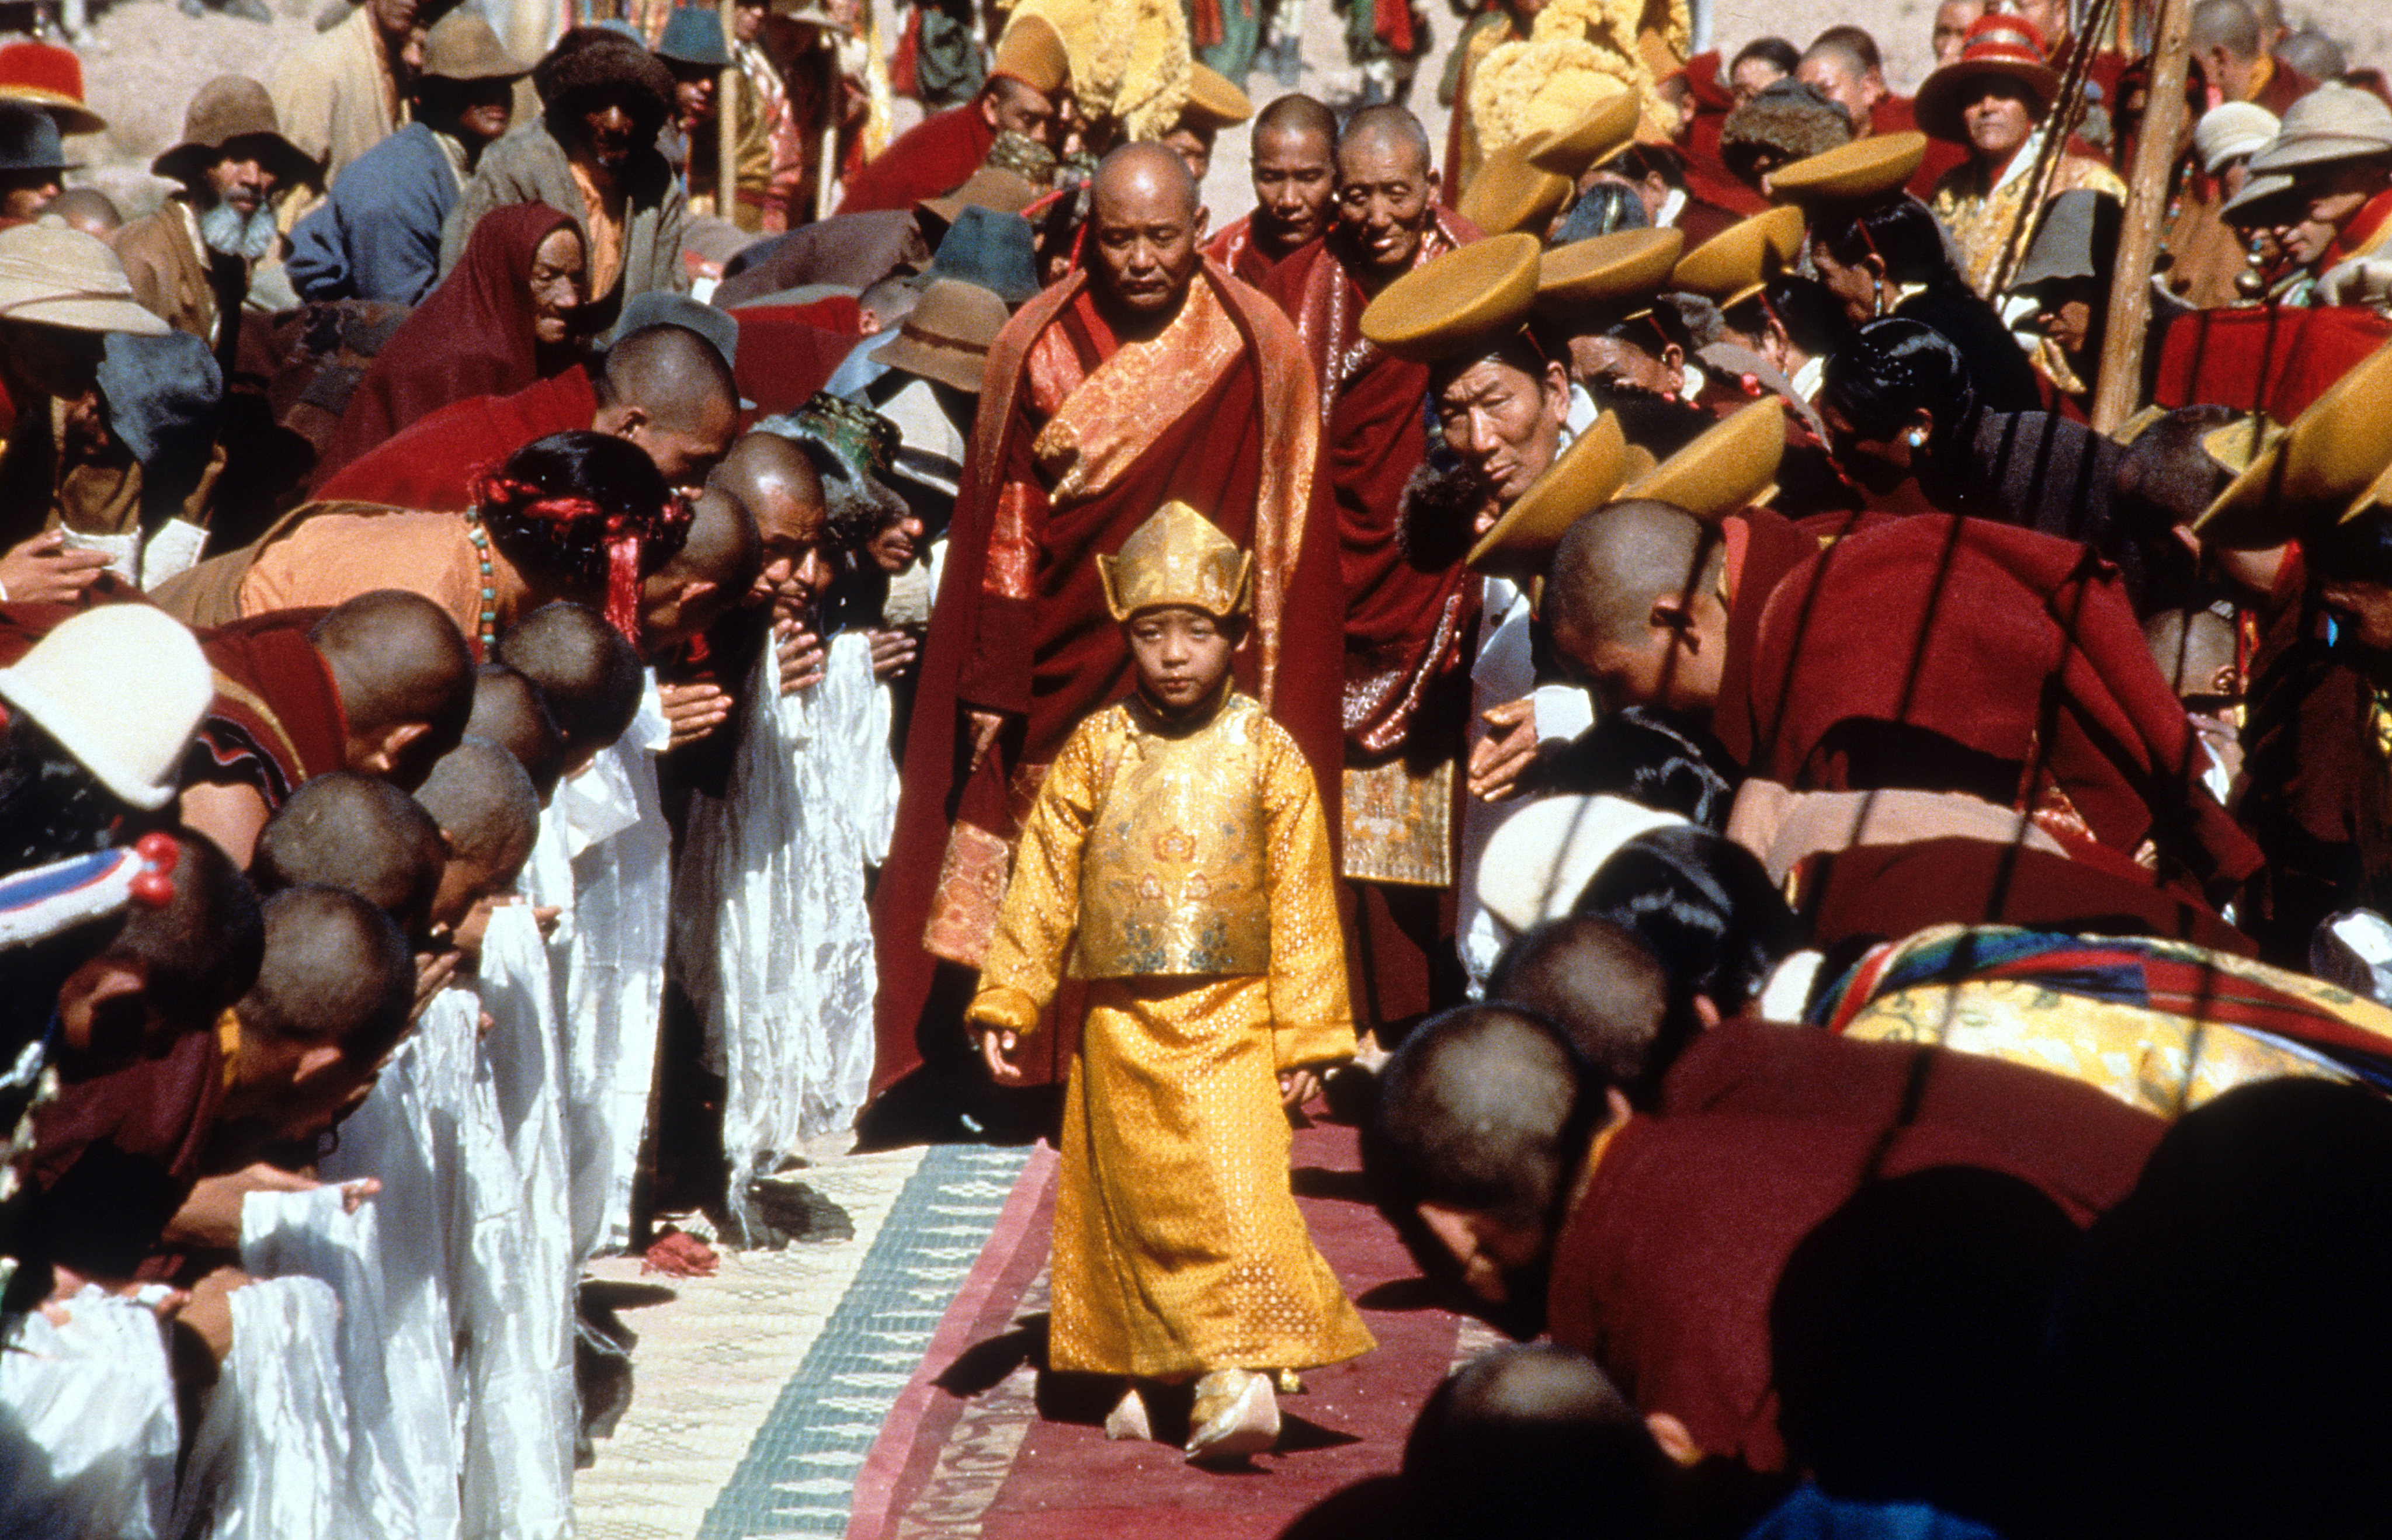 Tulku Jamyang Kunga Tenzin is bowed to in a scene from the film &apos;Kundun&apos;, 1997. (Photo by Buena Vista/Getty Images)